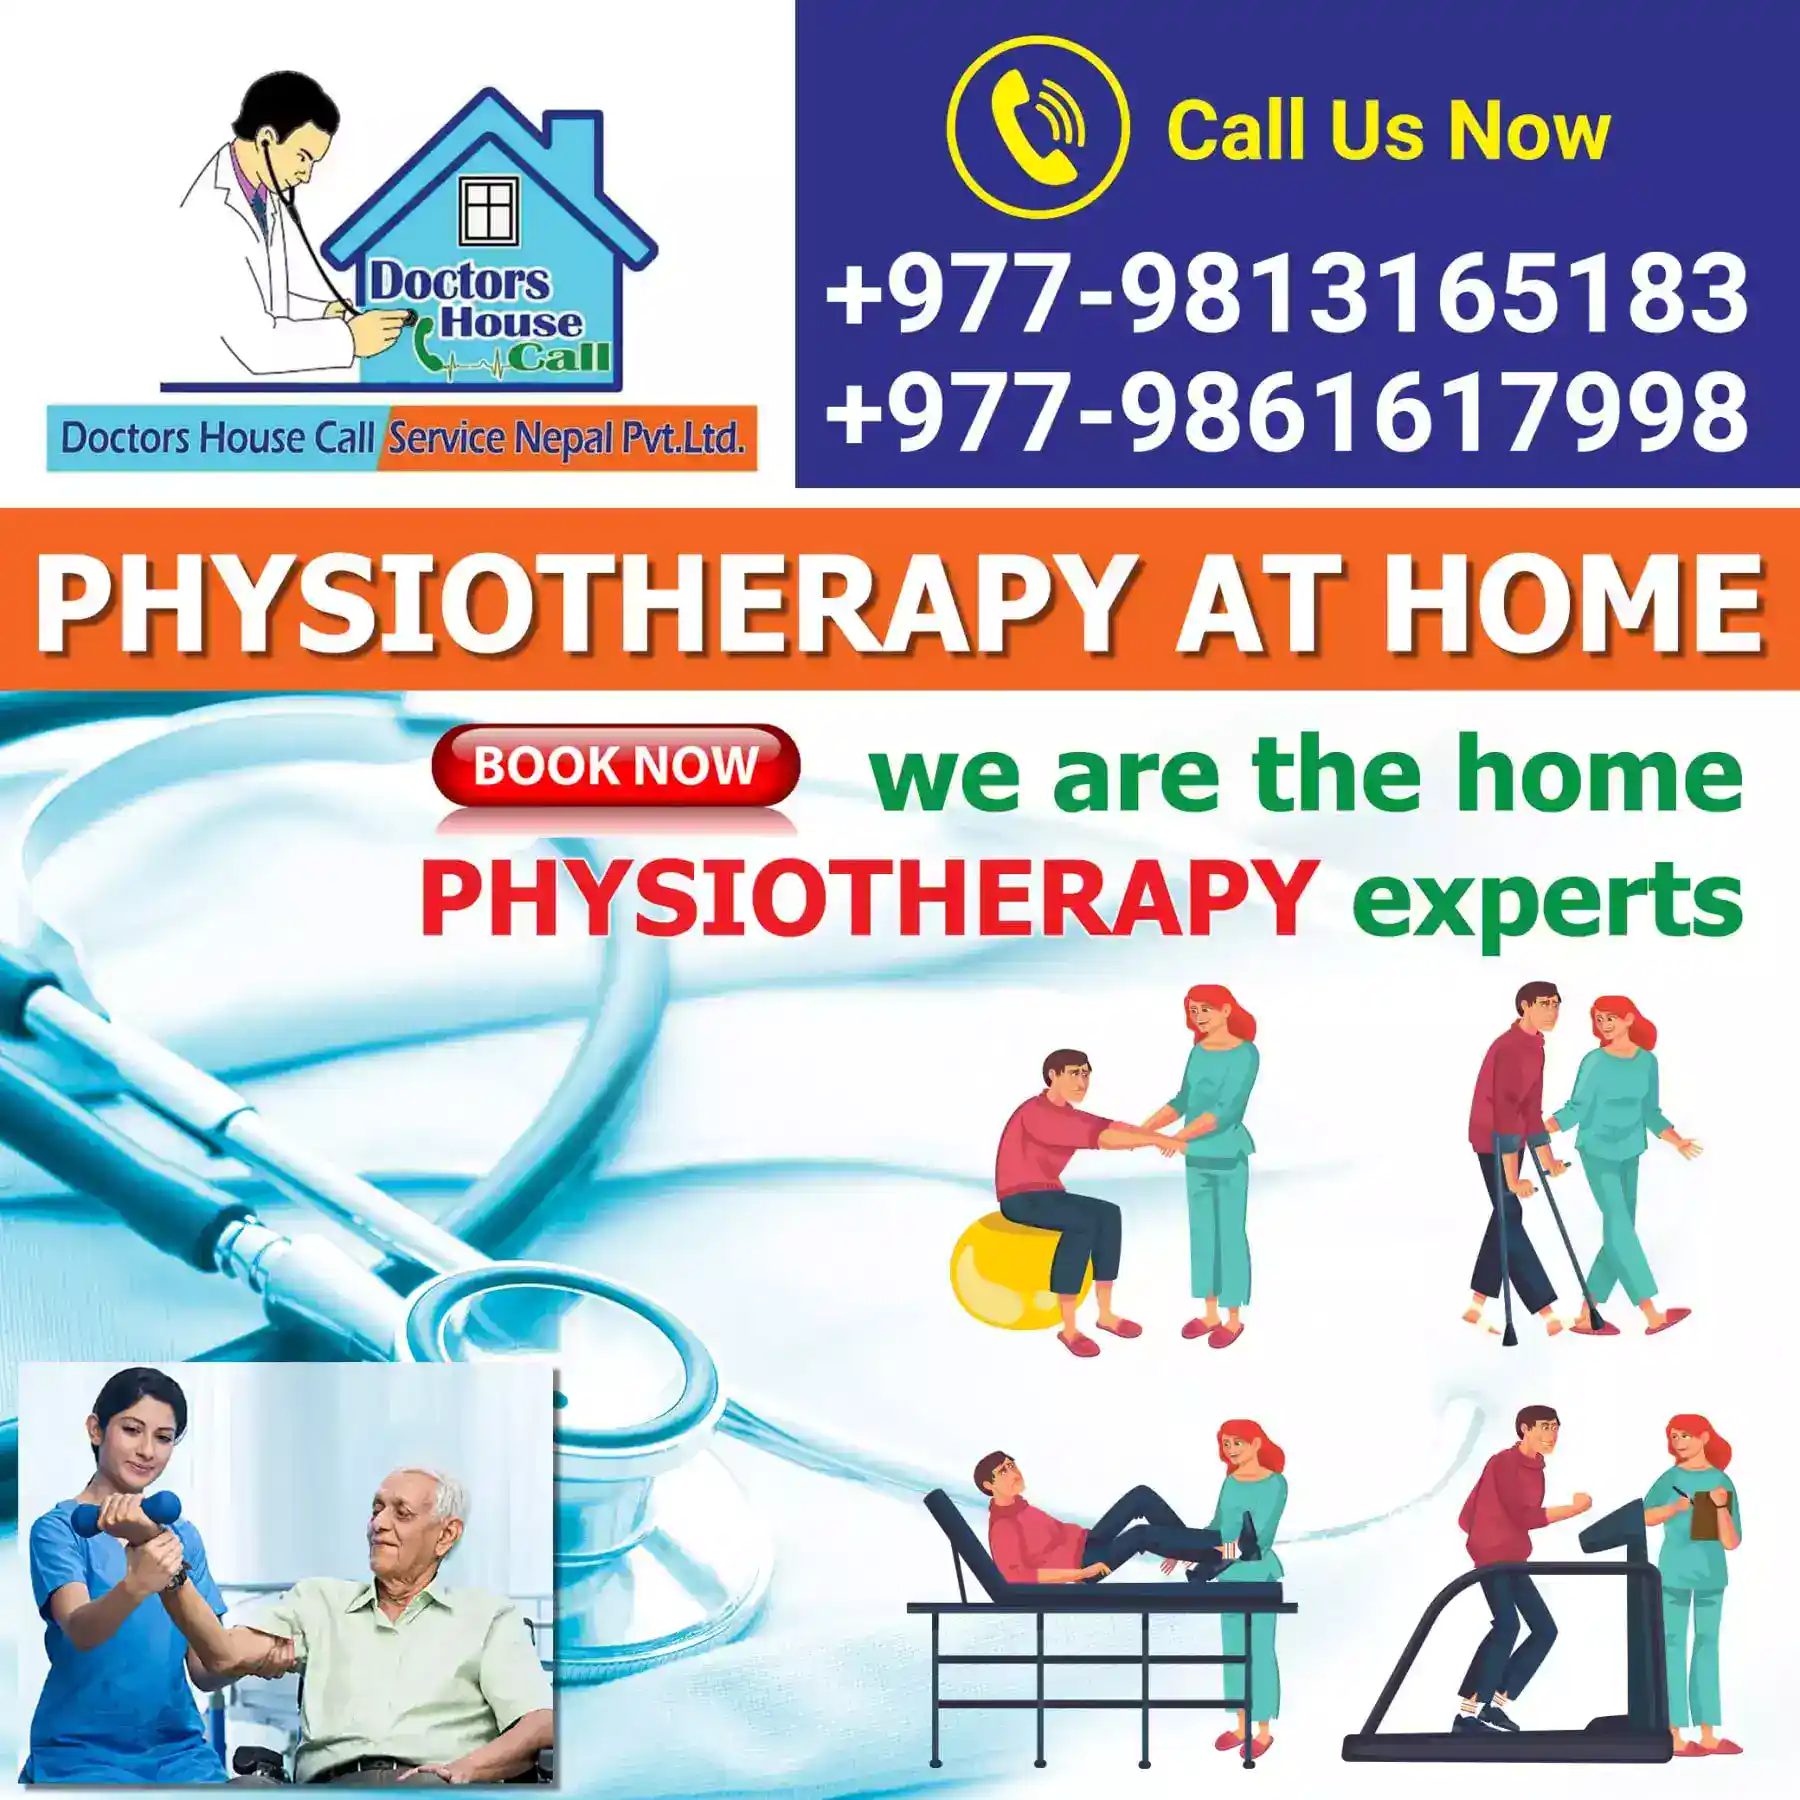 Physiotherapy at Home - Doctors House Call Service Nepal